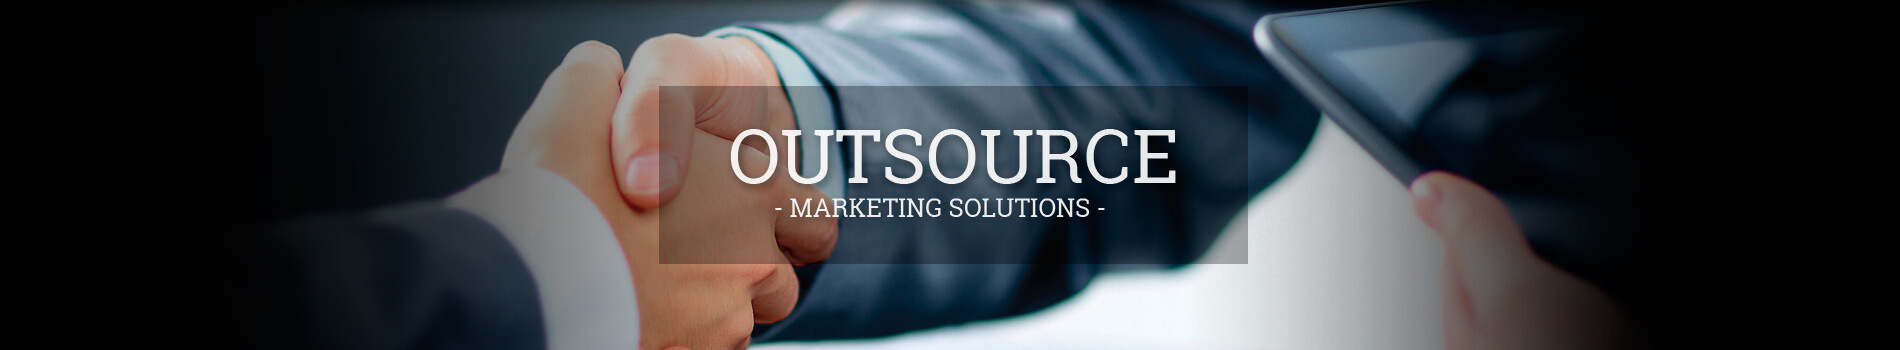 , Outsource Marketing Solutions, Anchor Training Courses &amp; Consulting Services